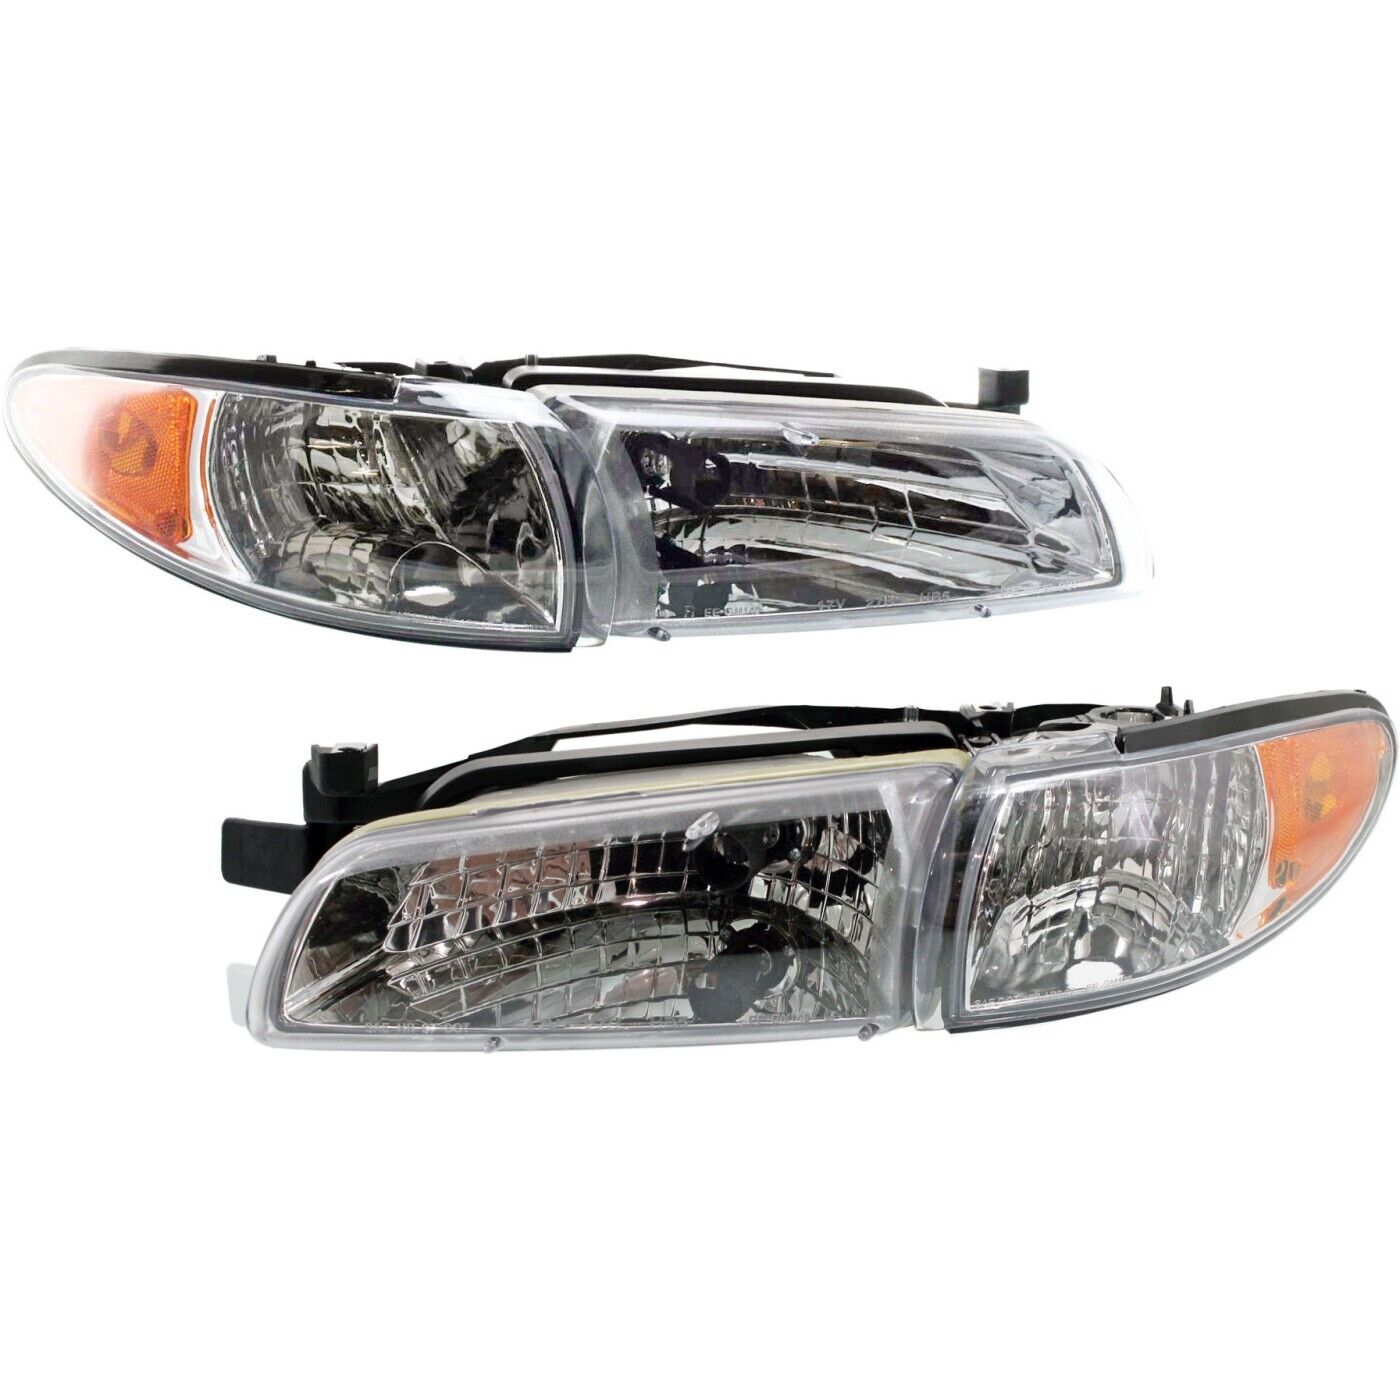 Headlight Set For 1997-2003 Pontiac Grand Prix Left Right With Housing Assembly